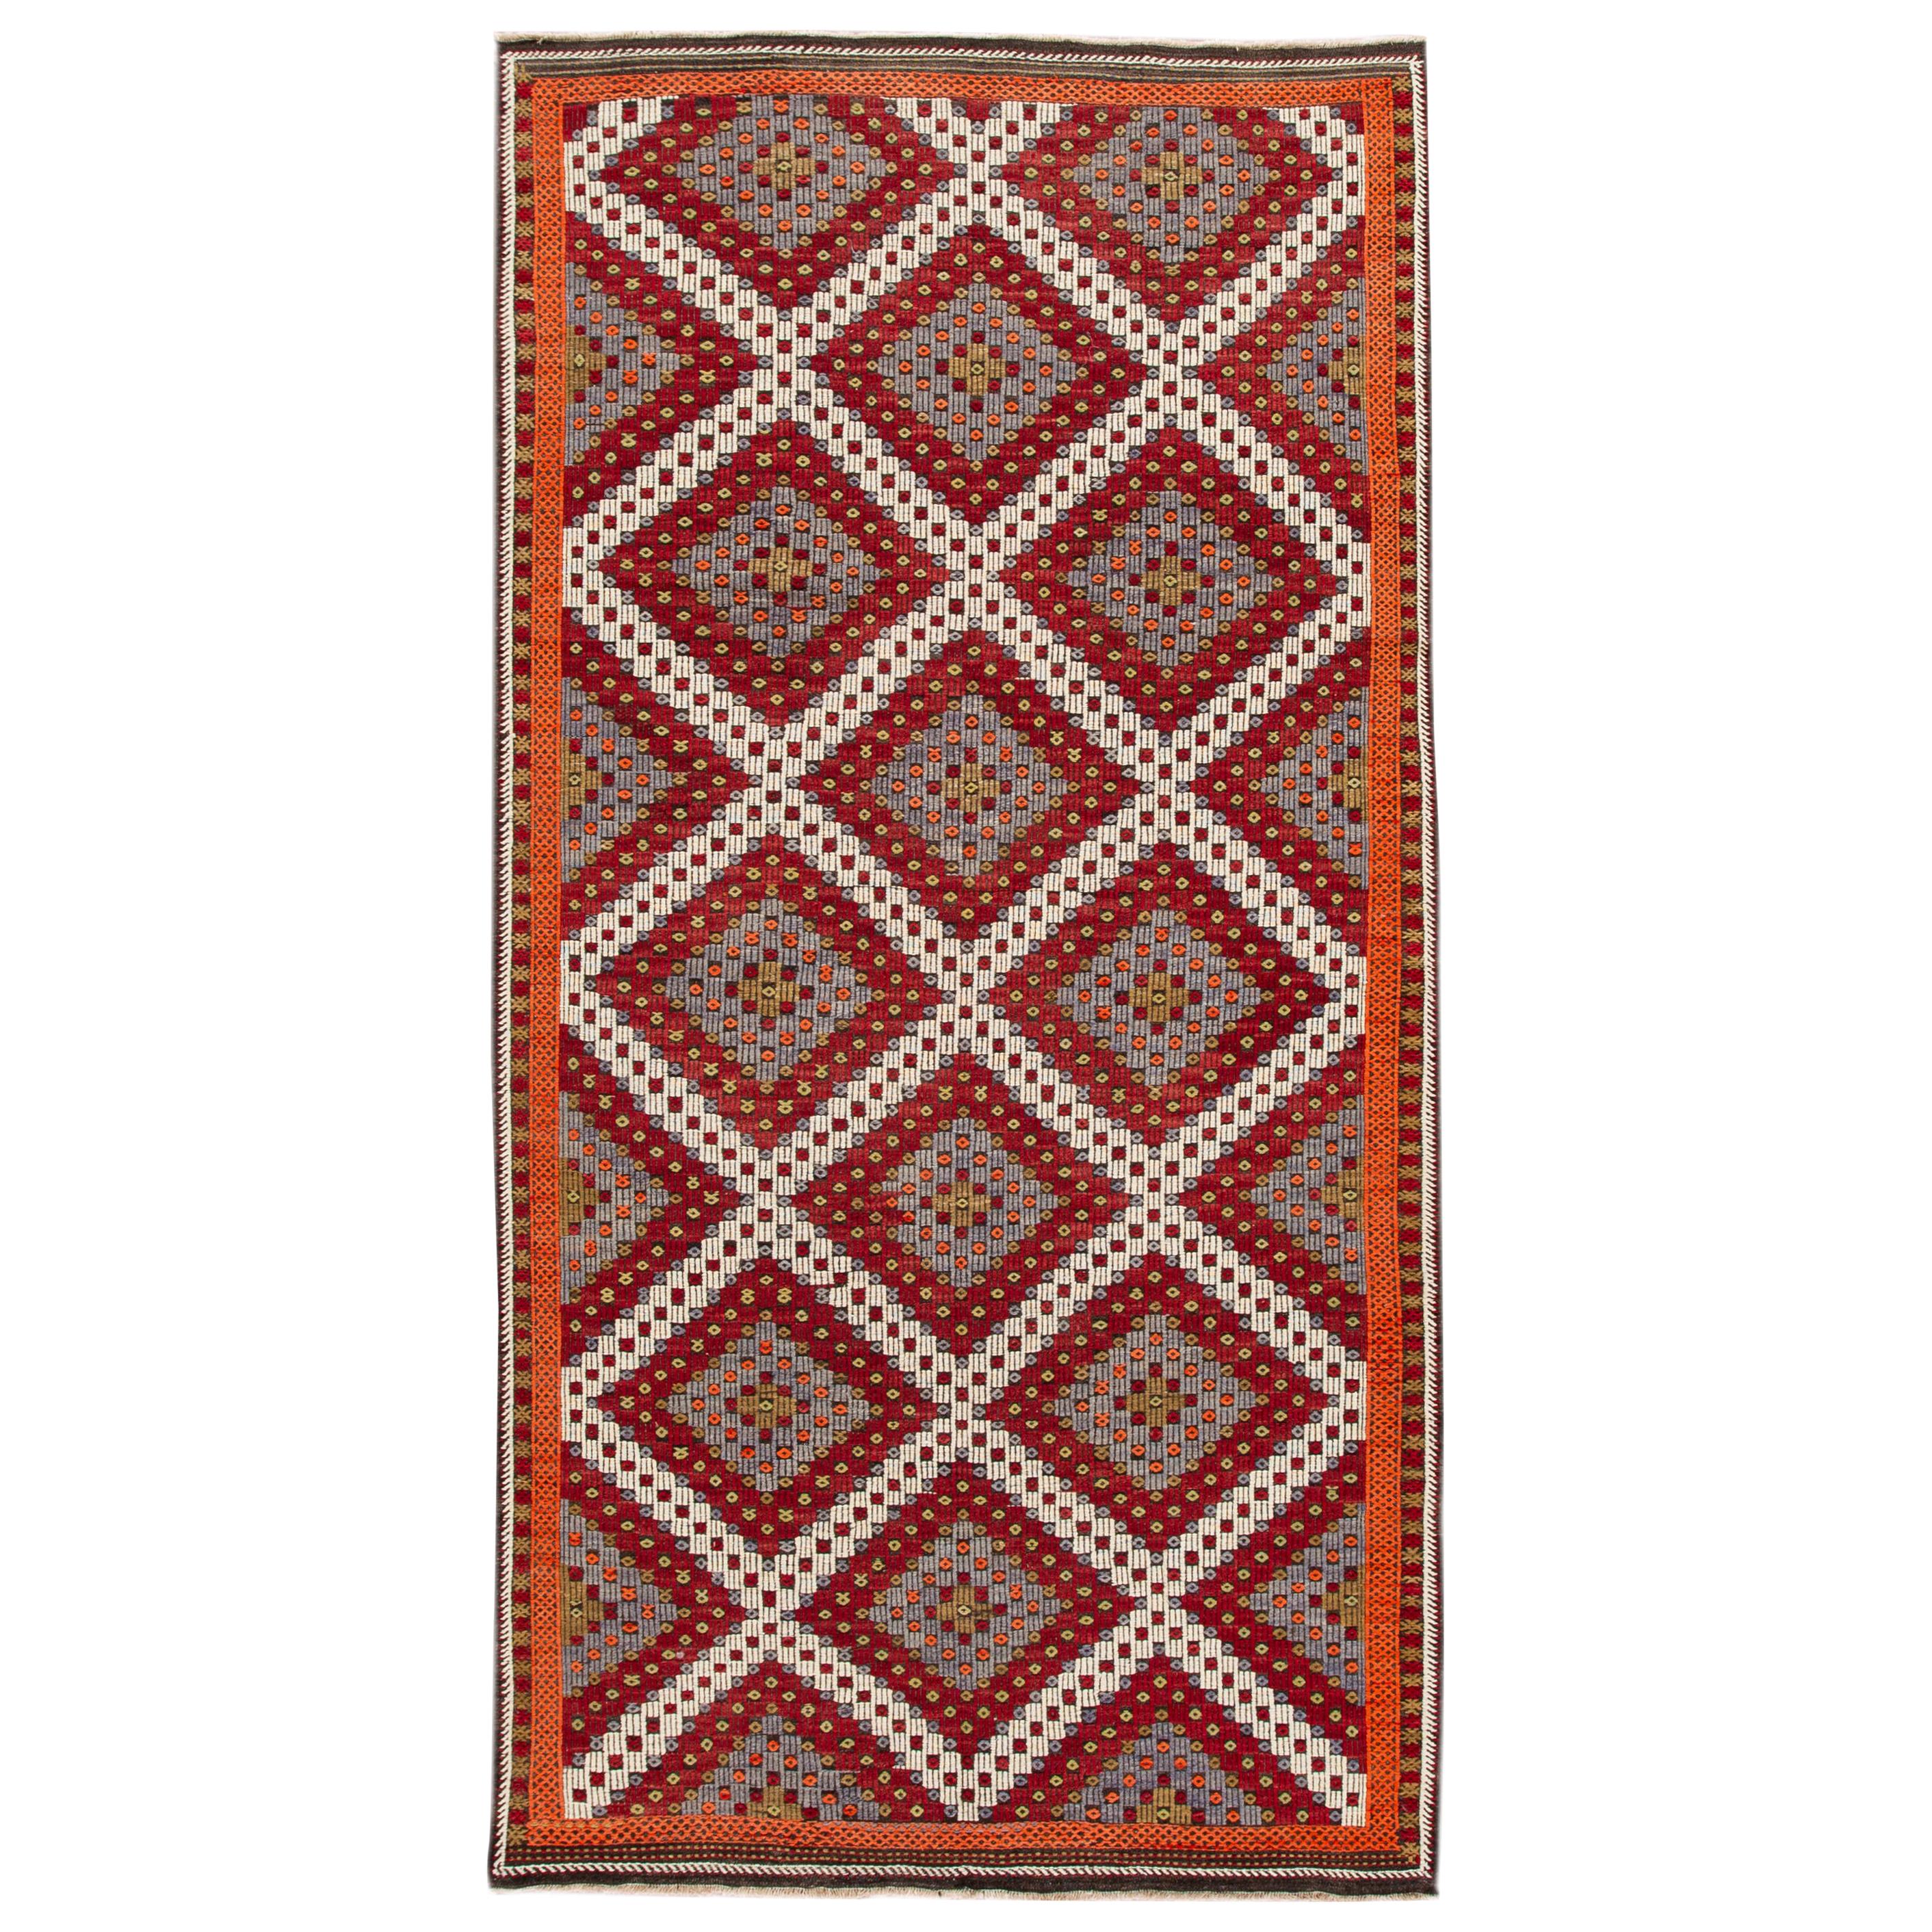 Beautiful vintage Turkish flat-weave Soumak hand knotted wool rug with a multi-color field and accents in all-over geometric design,

This rug measures 6' 1